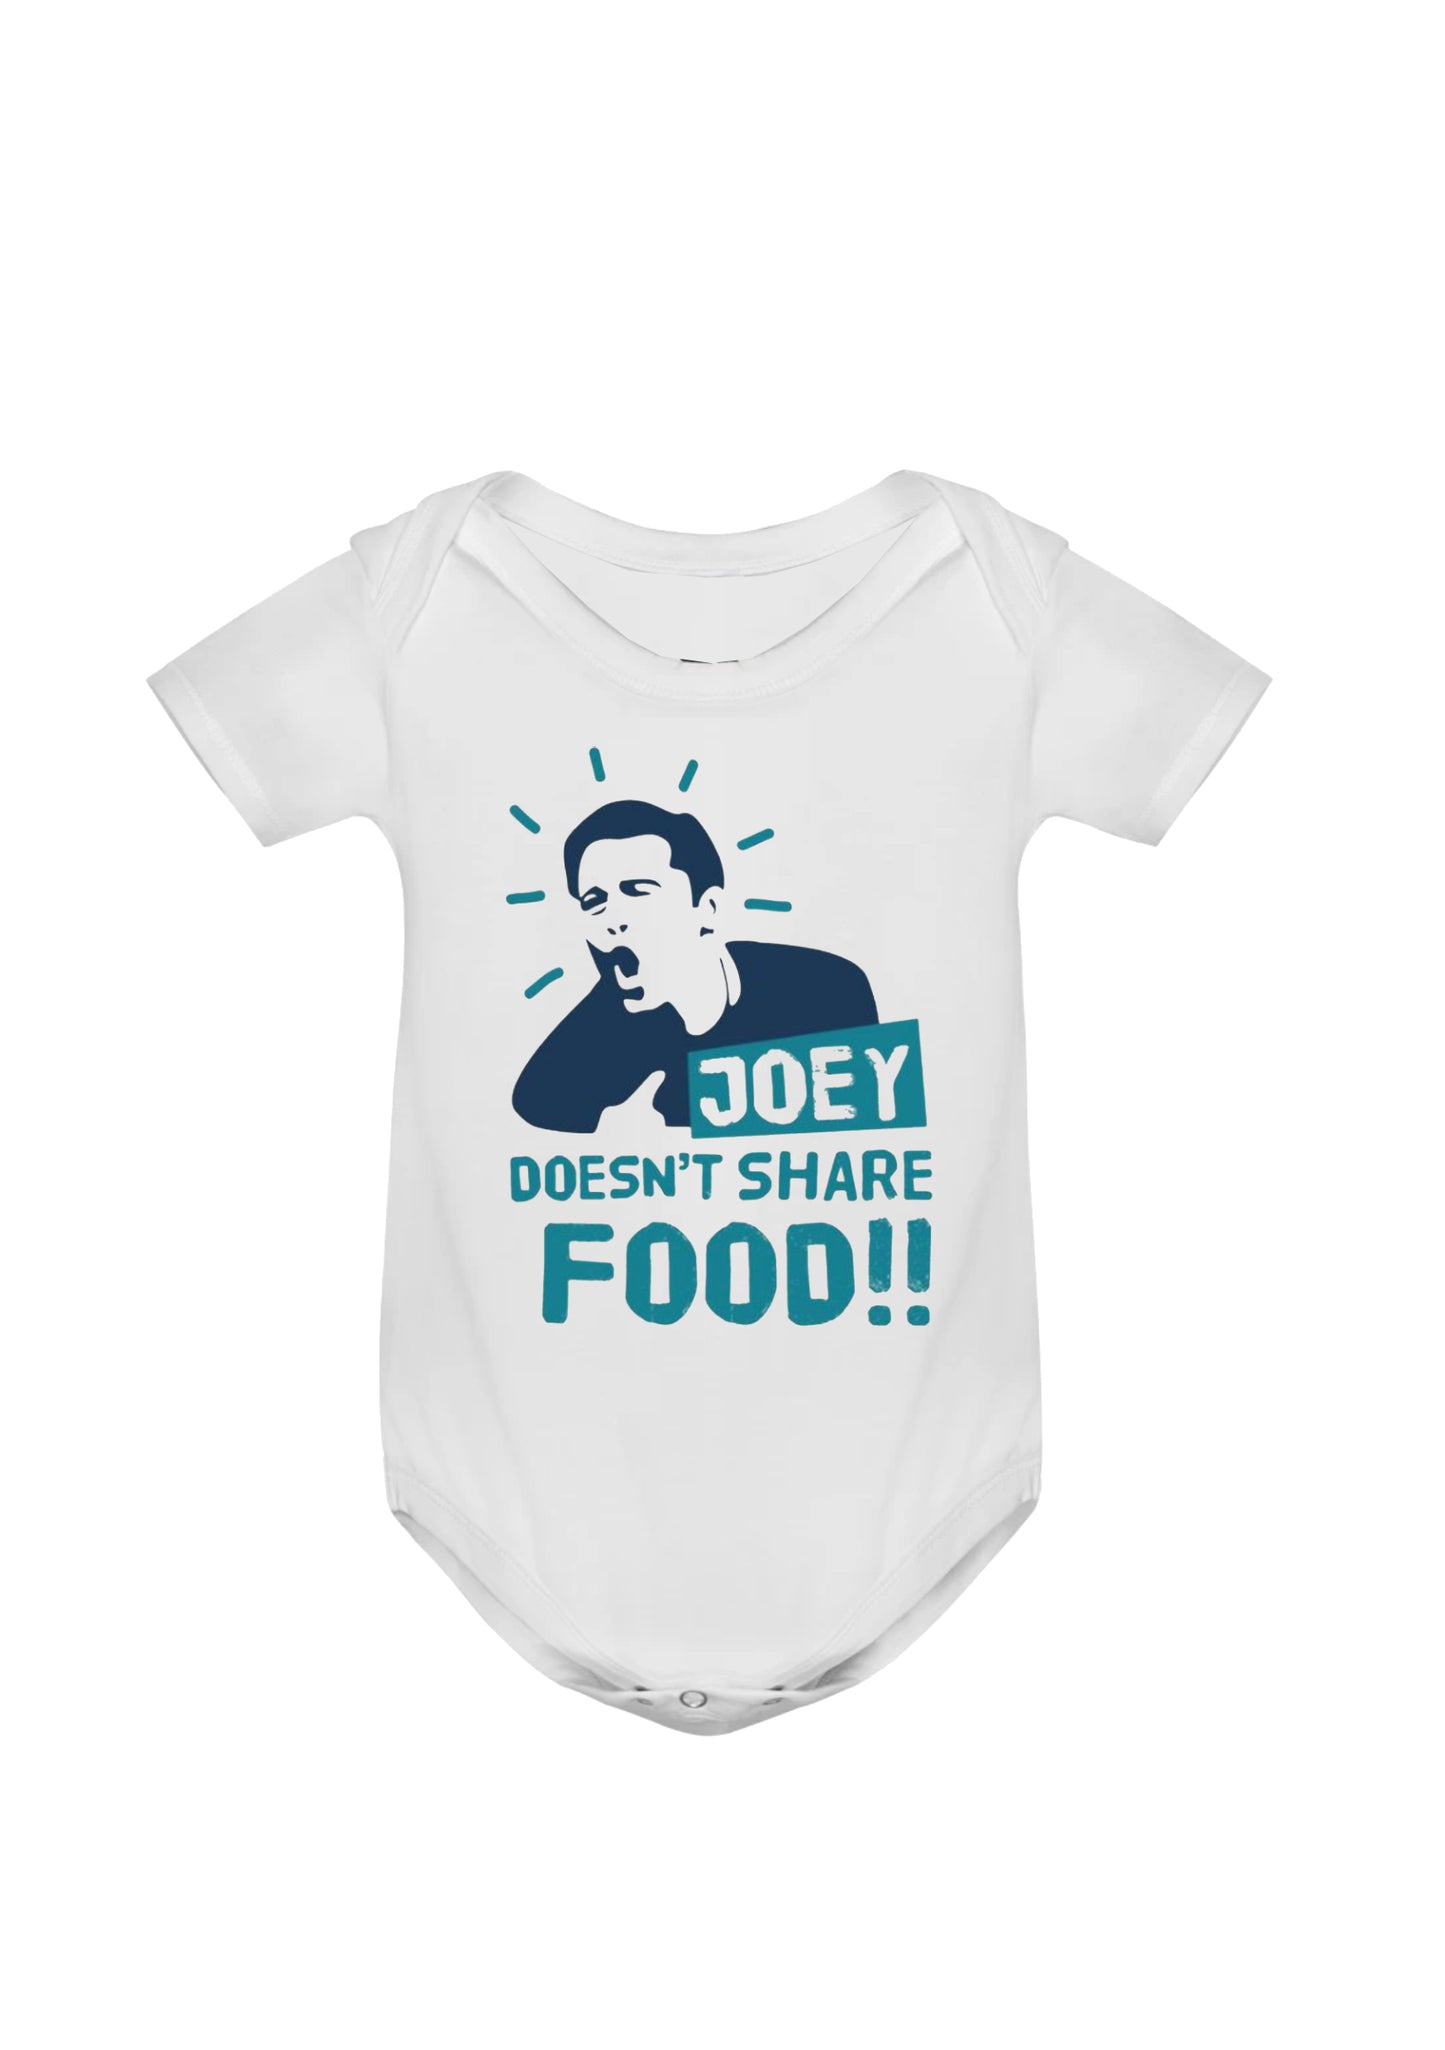 body - joey doesn't share food